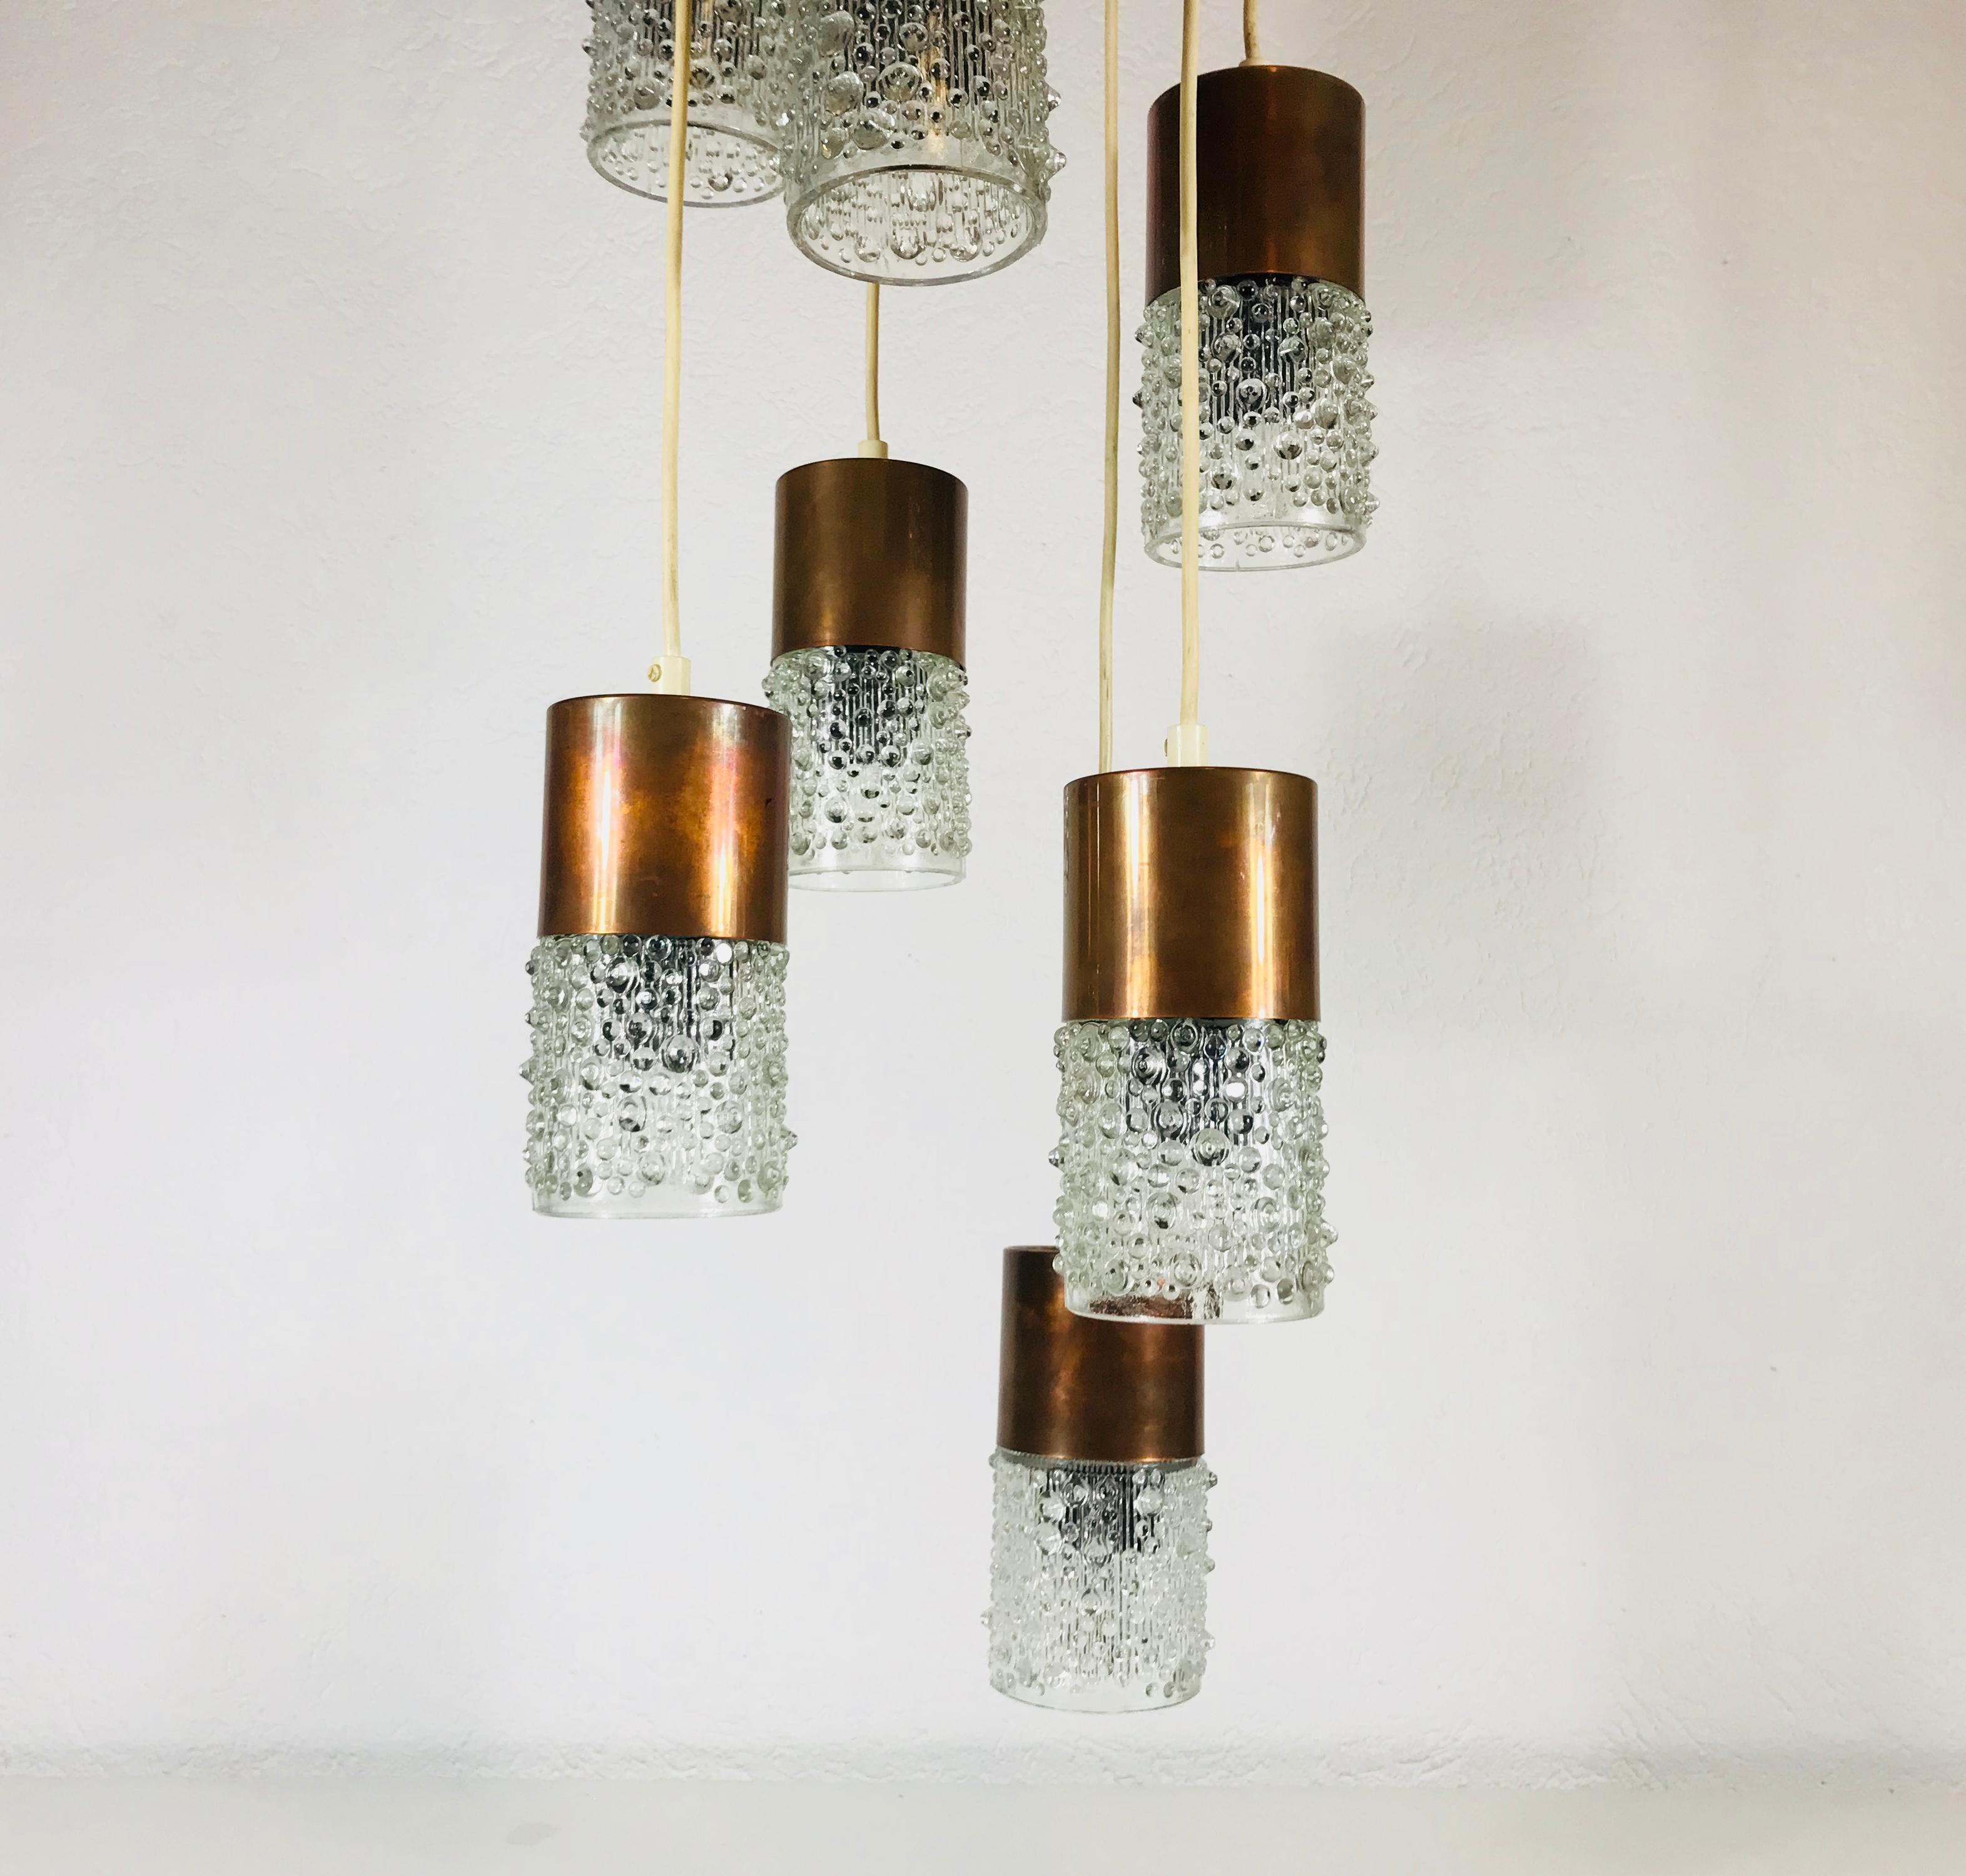 Cascade pendant lamp made in DDR in the 1960s. It is fascinating with its rare bubble glass shapes. The seven arms are all are made of polished copper and glas. The round top part above the lamp is bakelit and copper.

The light requires seven E14